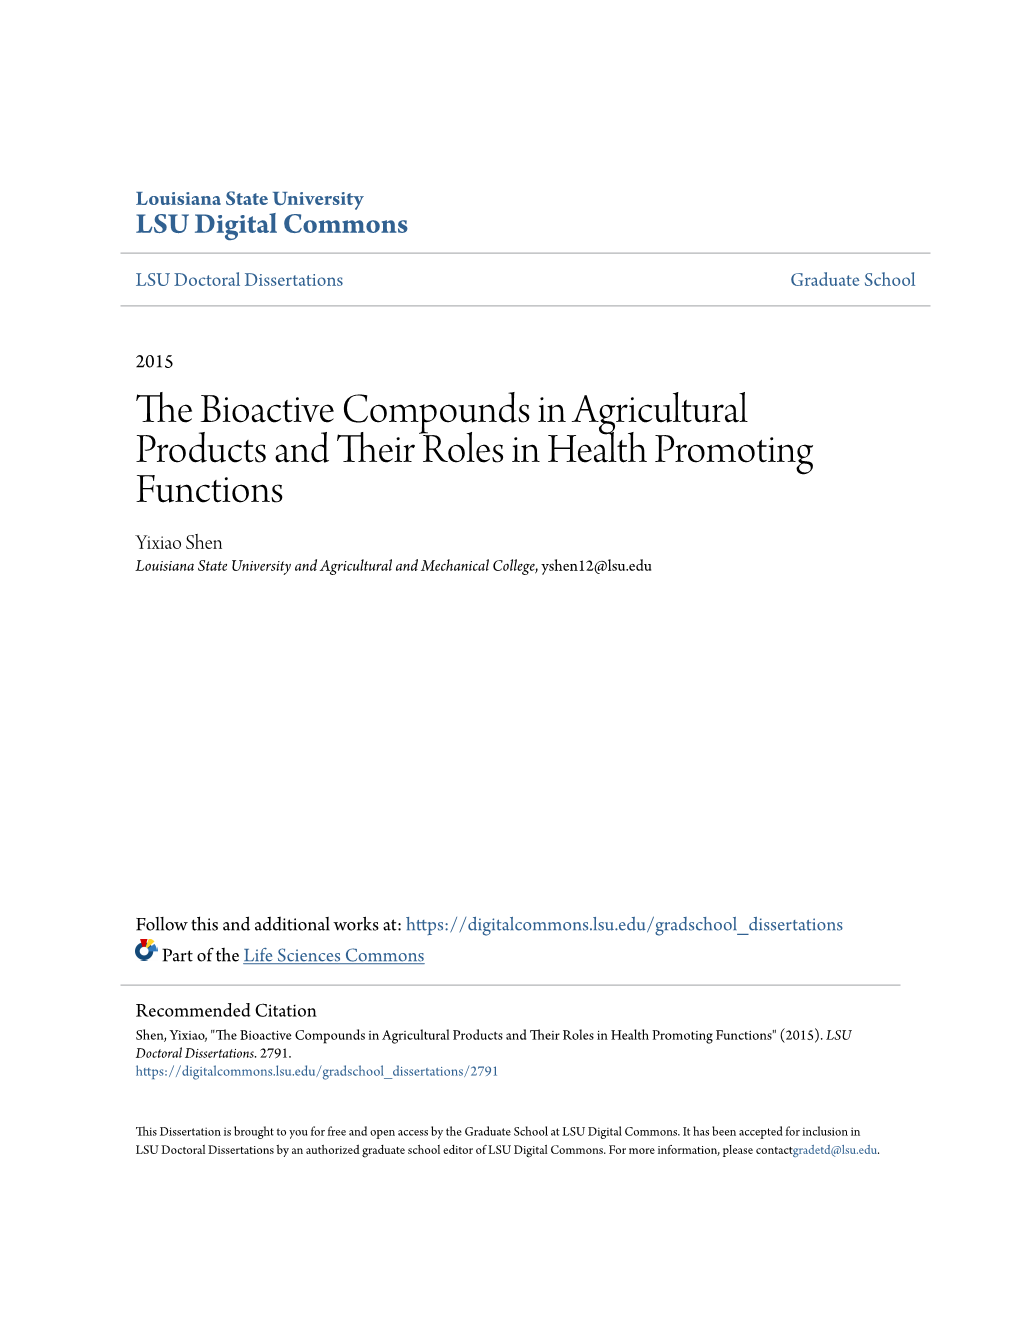 The Bioactive Compounds in Agricultural Products and Their Roles in Health Promoting Functions